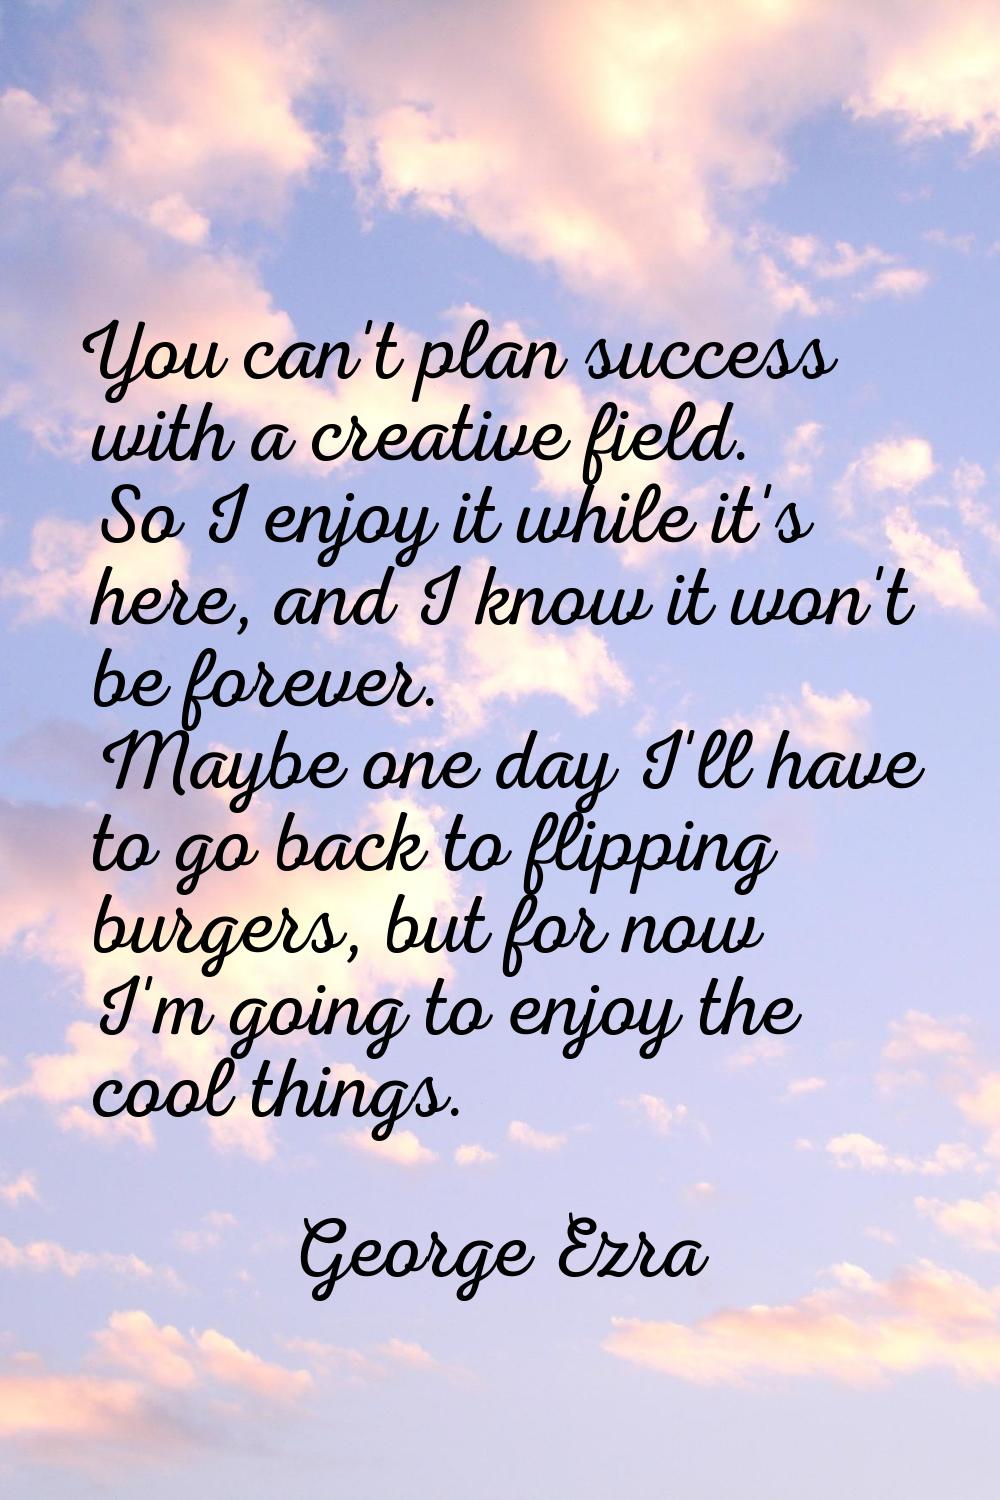 You can't plan success with a creative field. So I enjoy it while it's here, and I know it won't be